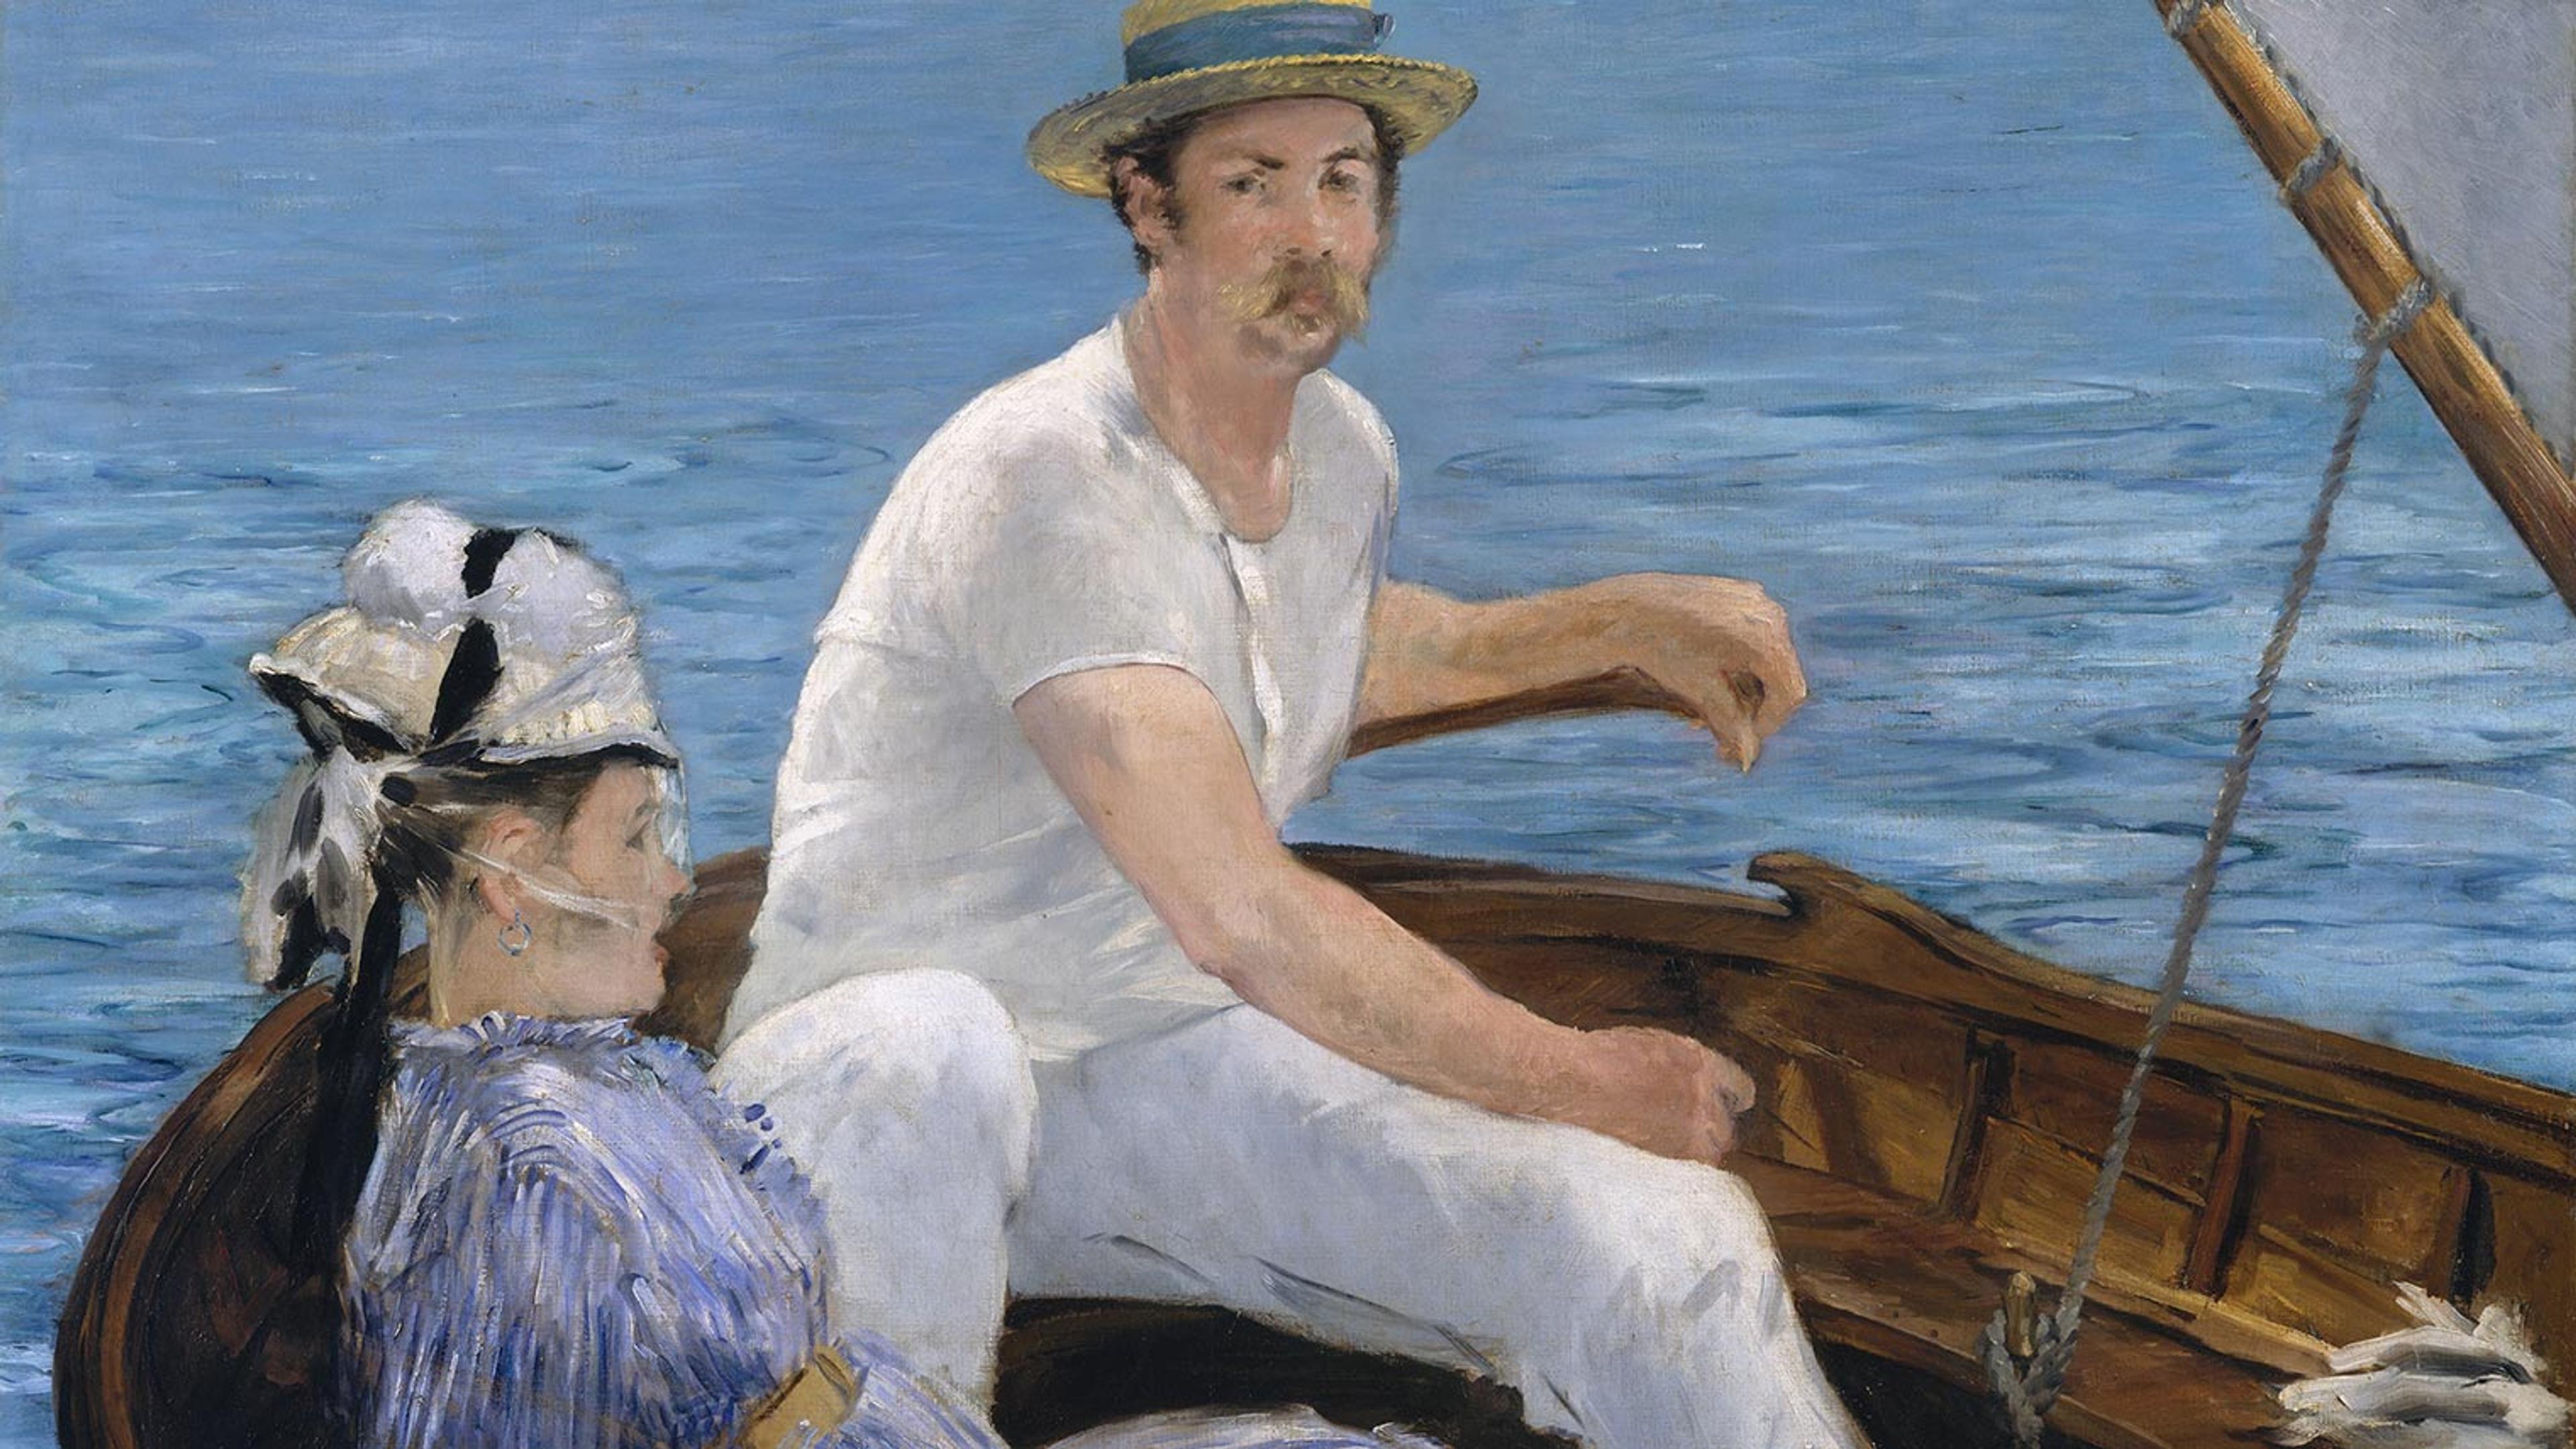 A painting of a man and woman boating